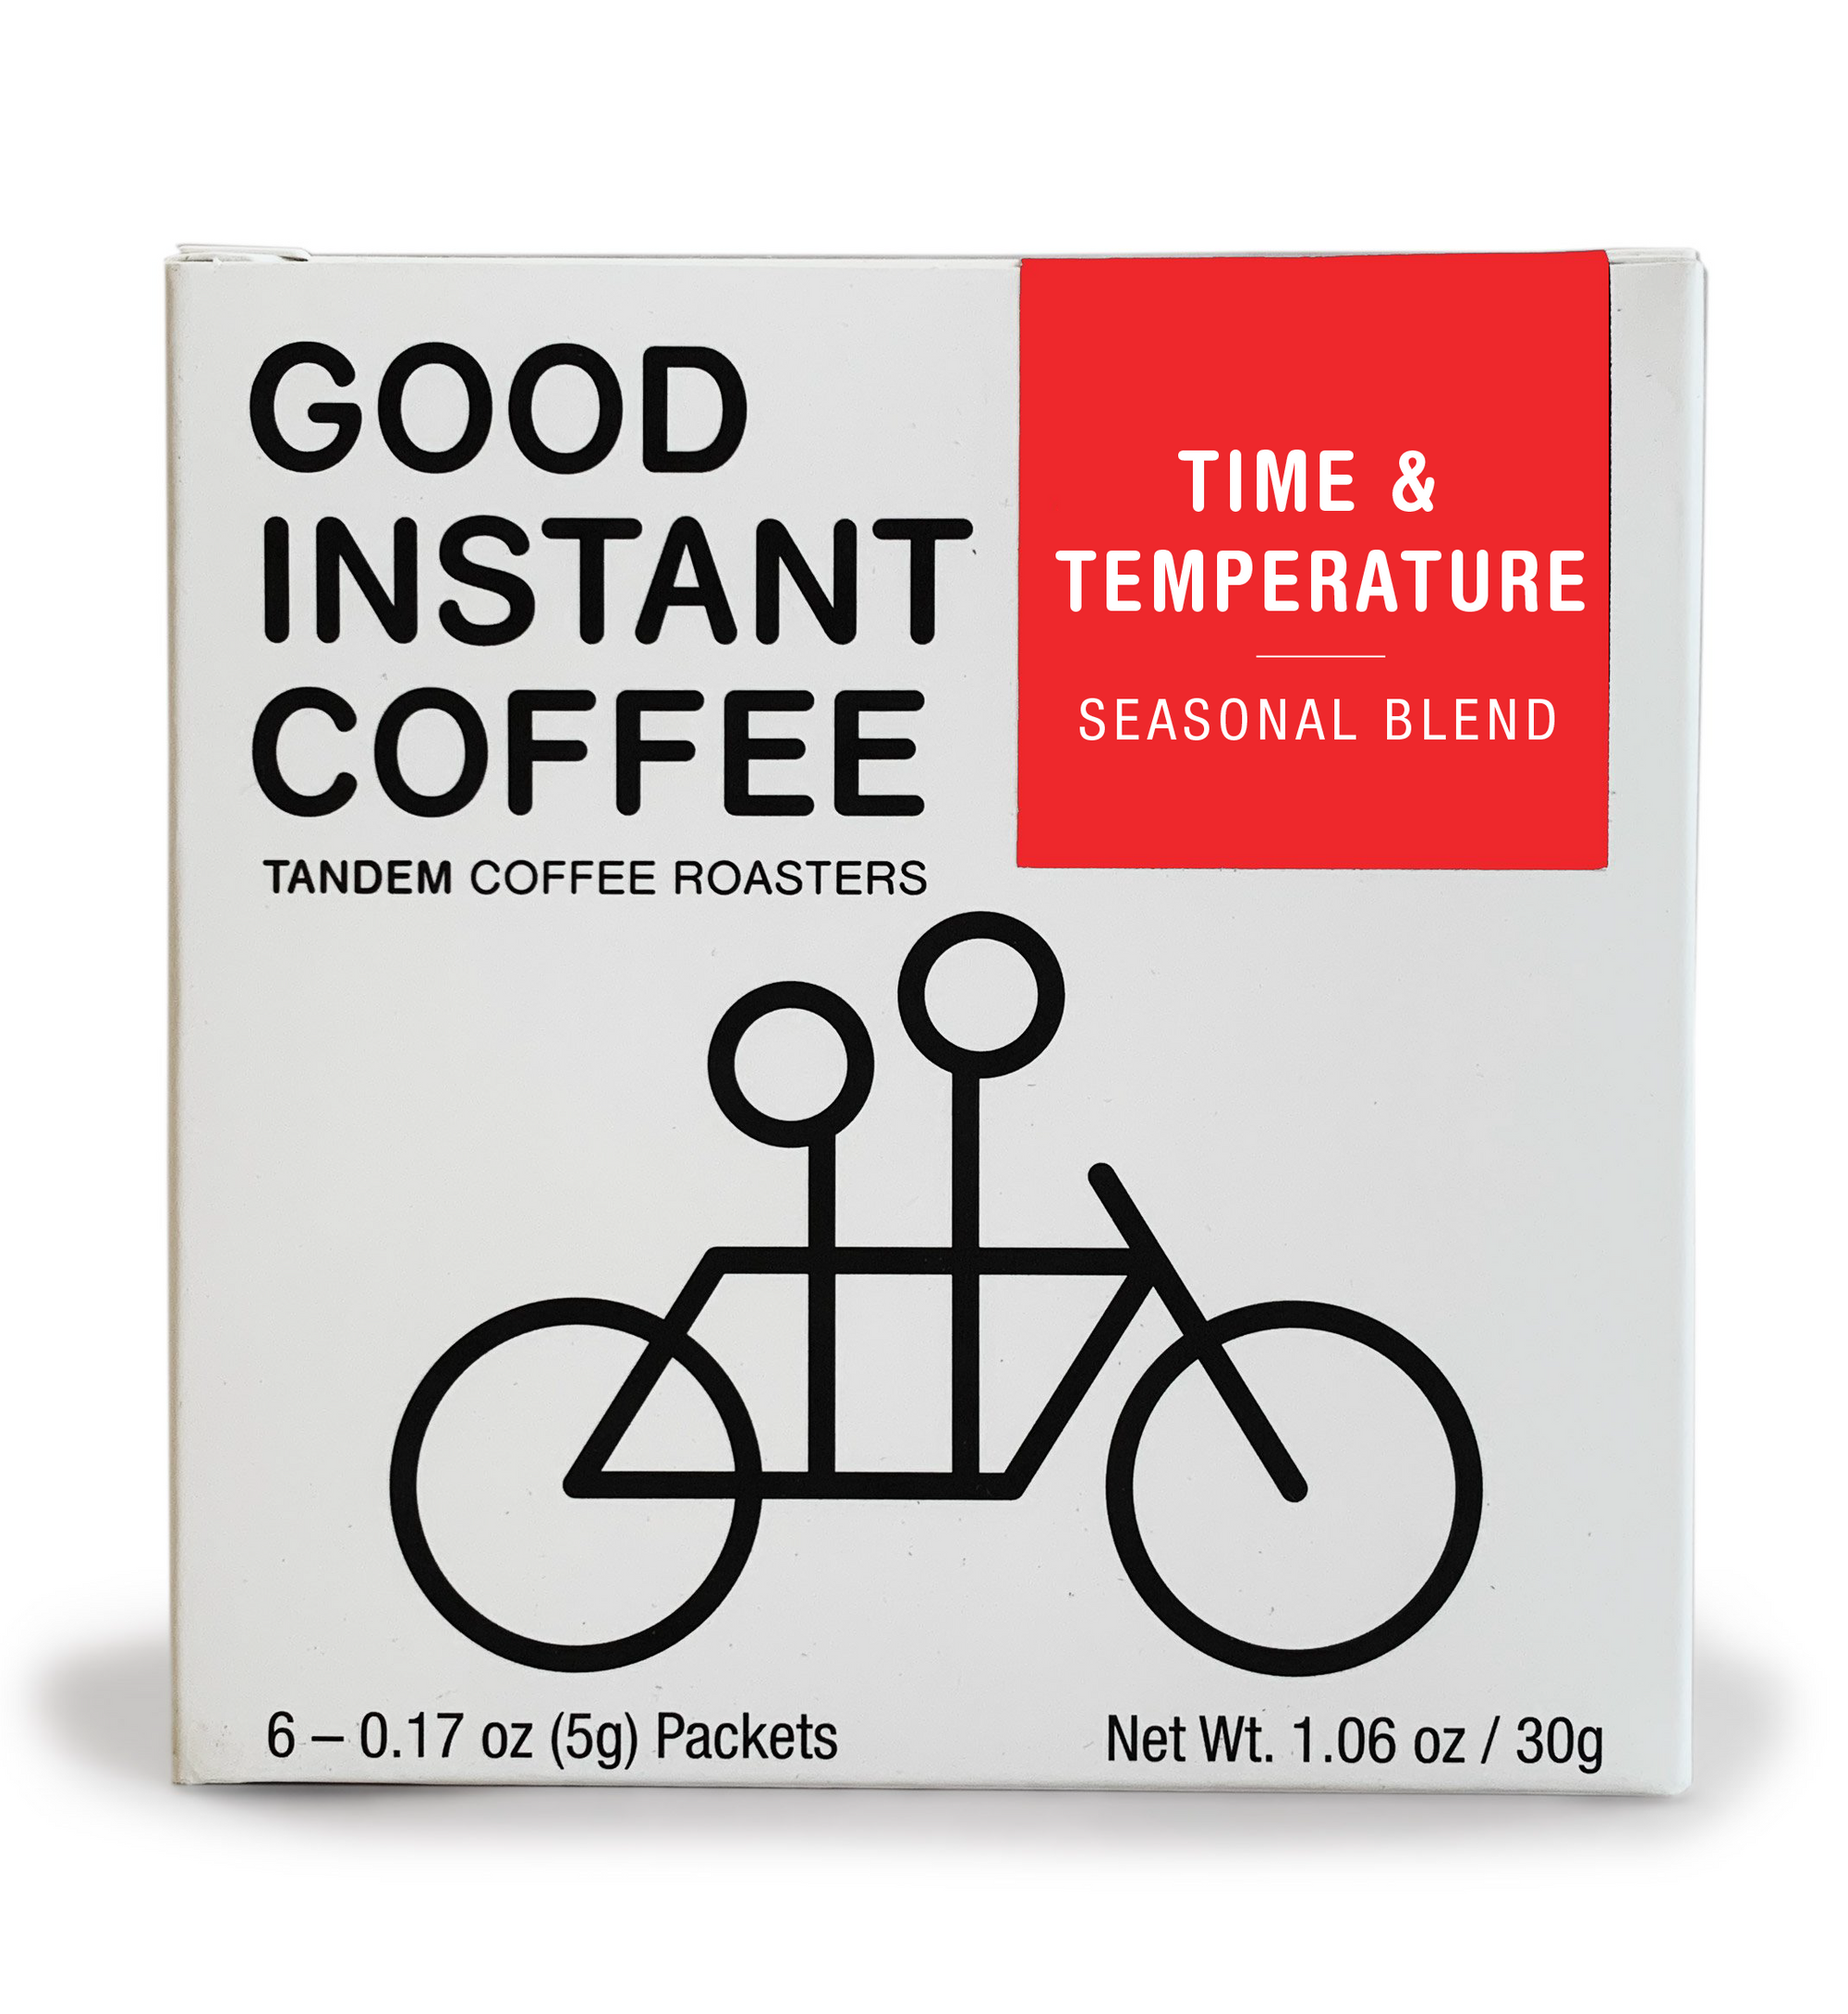 A box of Tandem's "Time and Temperature Instant Coffee - 6 pack" labeled "Time & Temperature Seasonal Blend," featuring a tandem bicycle graphic, containing six 0.17 oz packets each.